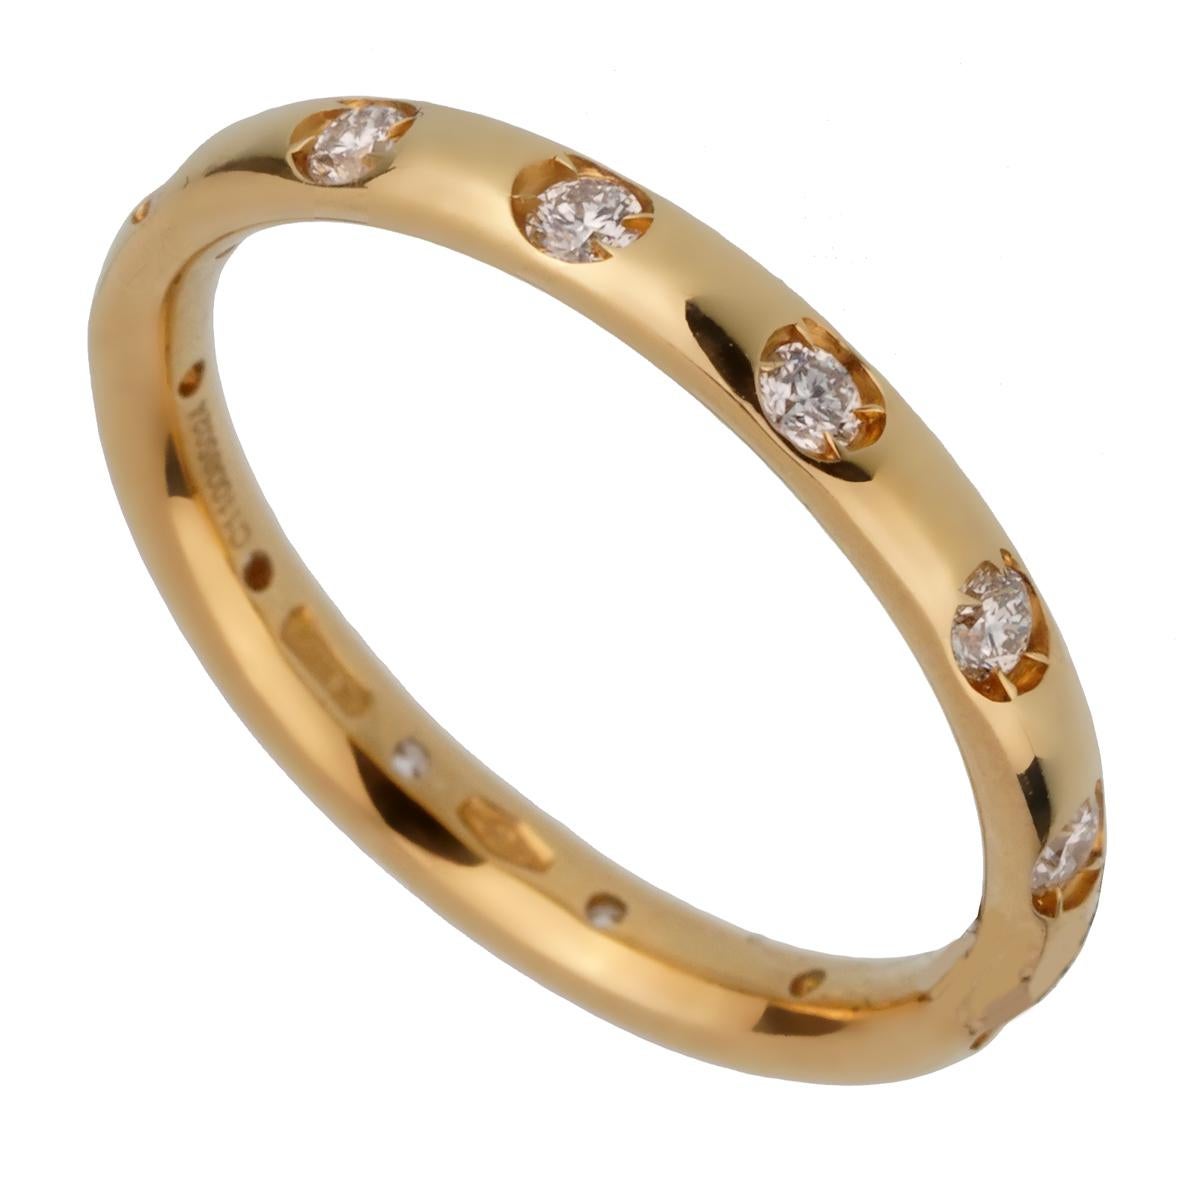 A chic brand new Pomellato diamond ring adorned with round brilliant cut diamonds in 18k yellow gold. The ring measures a size 5 1/4

Sku: 2340